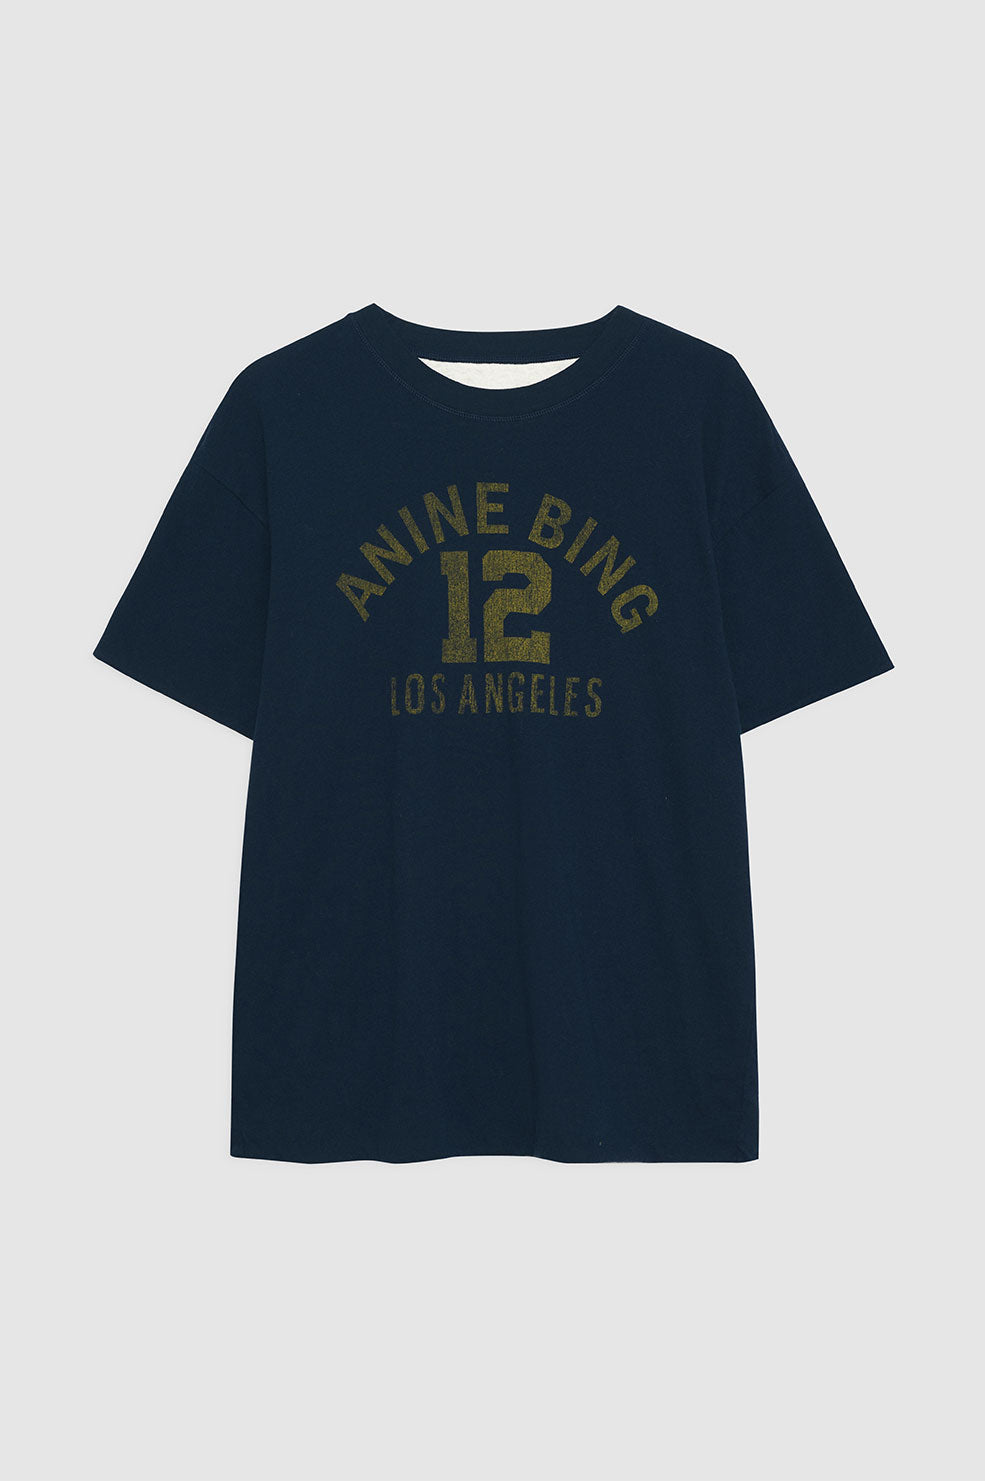 ANINE BING Toni Tee Reversible - Washed Navy And Off White 